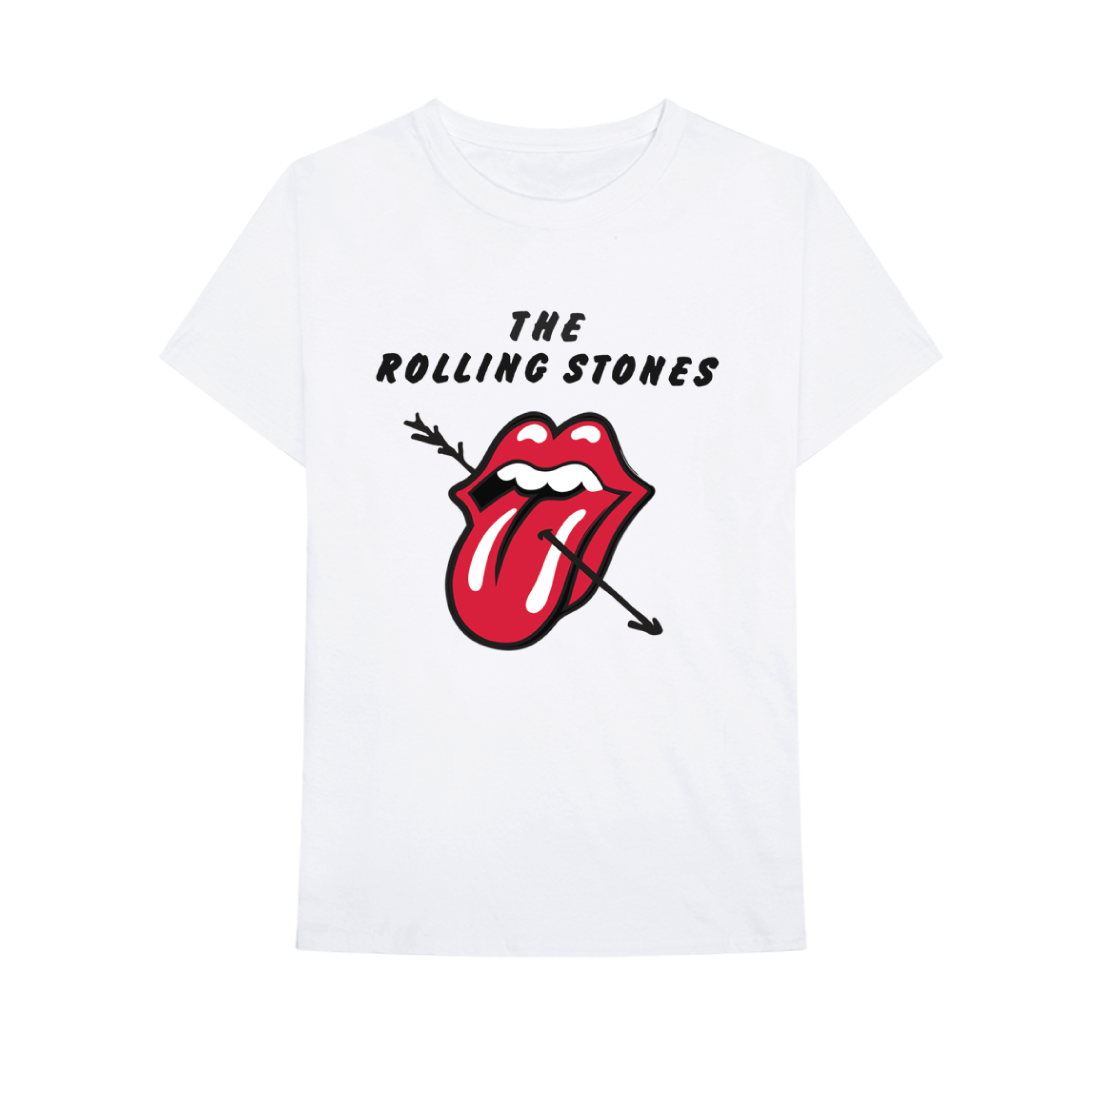 The Rolling Stones - Stones Love T-shirt